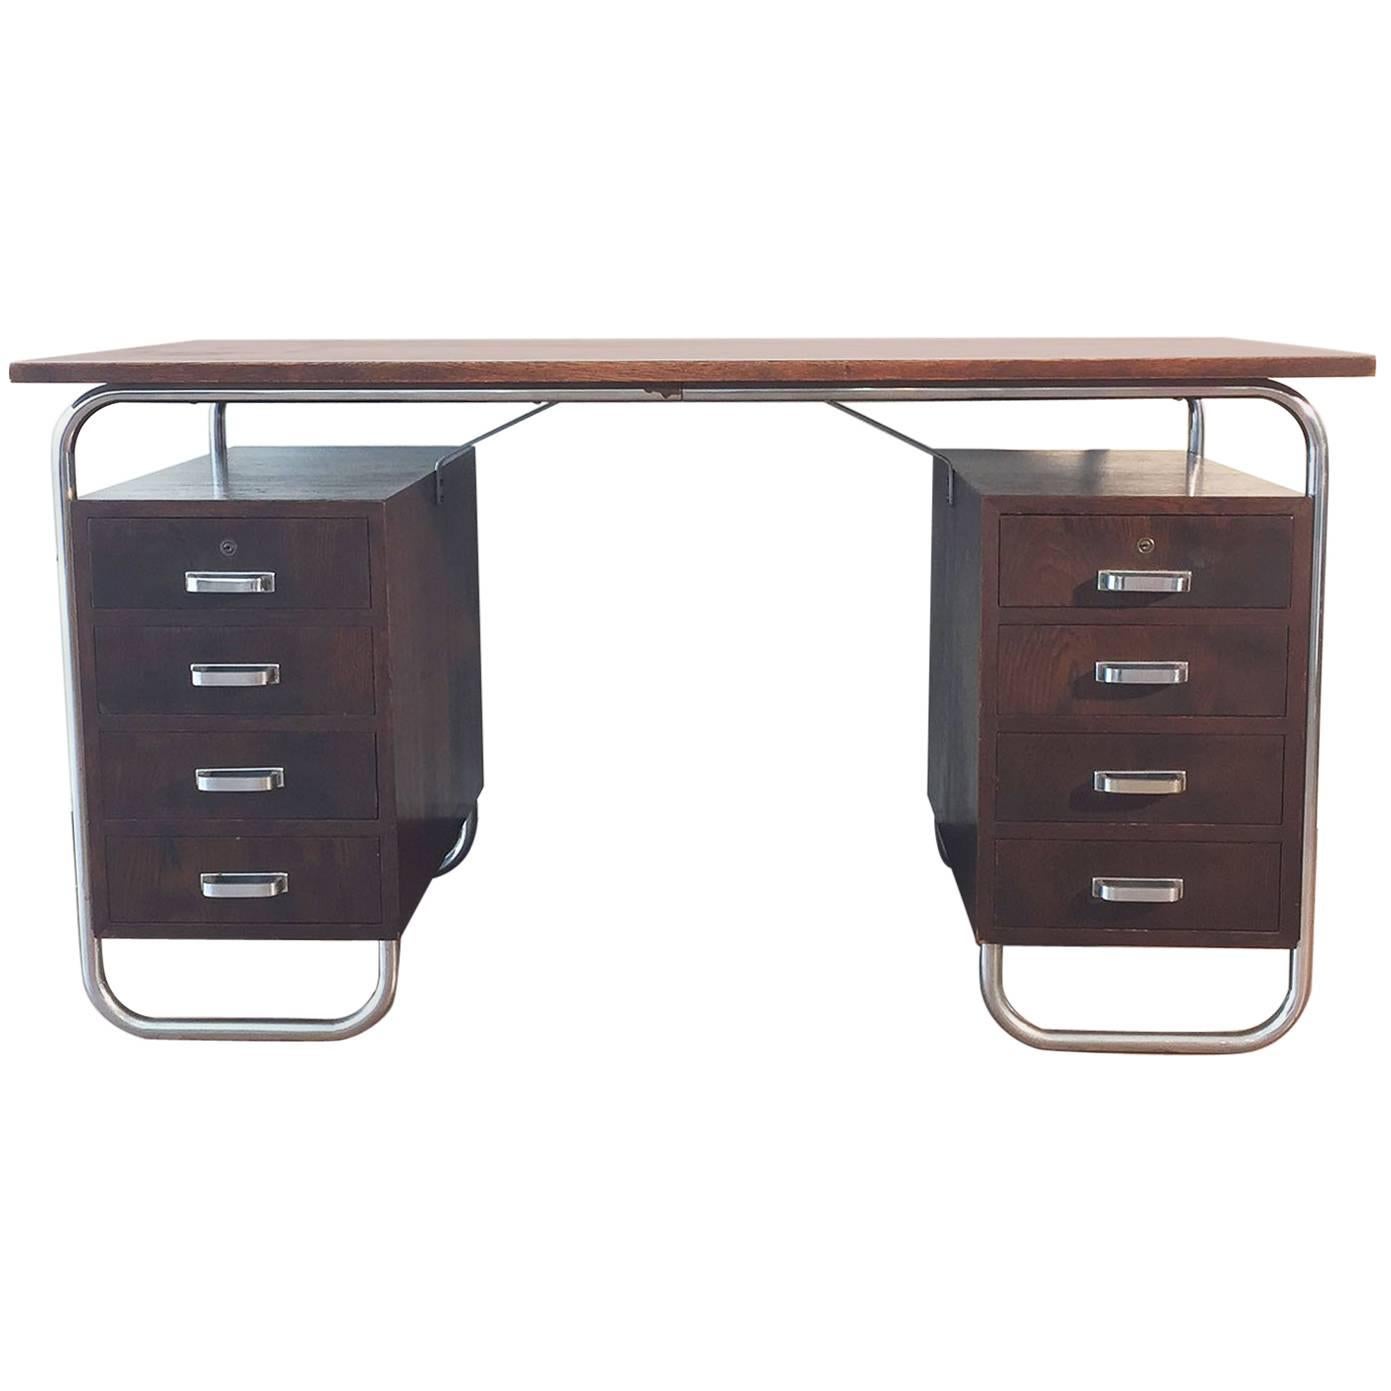 Chromed Steel and Tinted Beech Bauhaus Desk by Petr Vichr for Kovona, 1930s For Sale